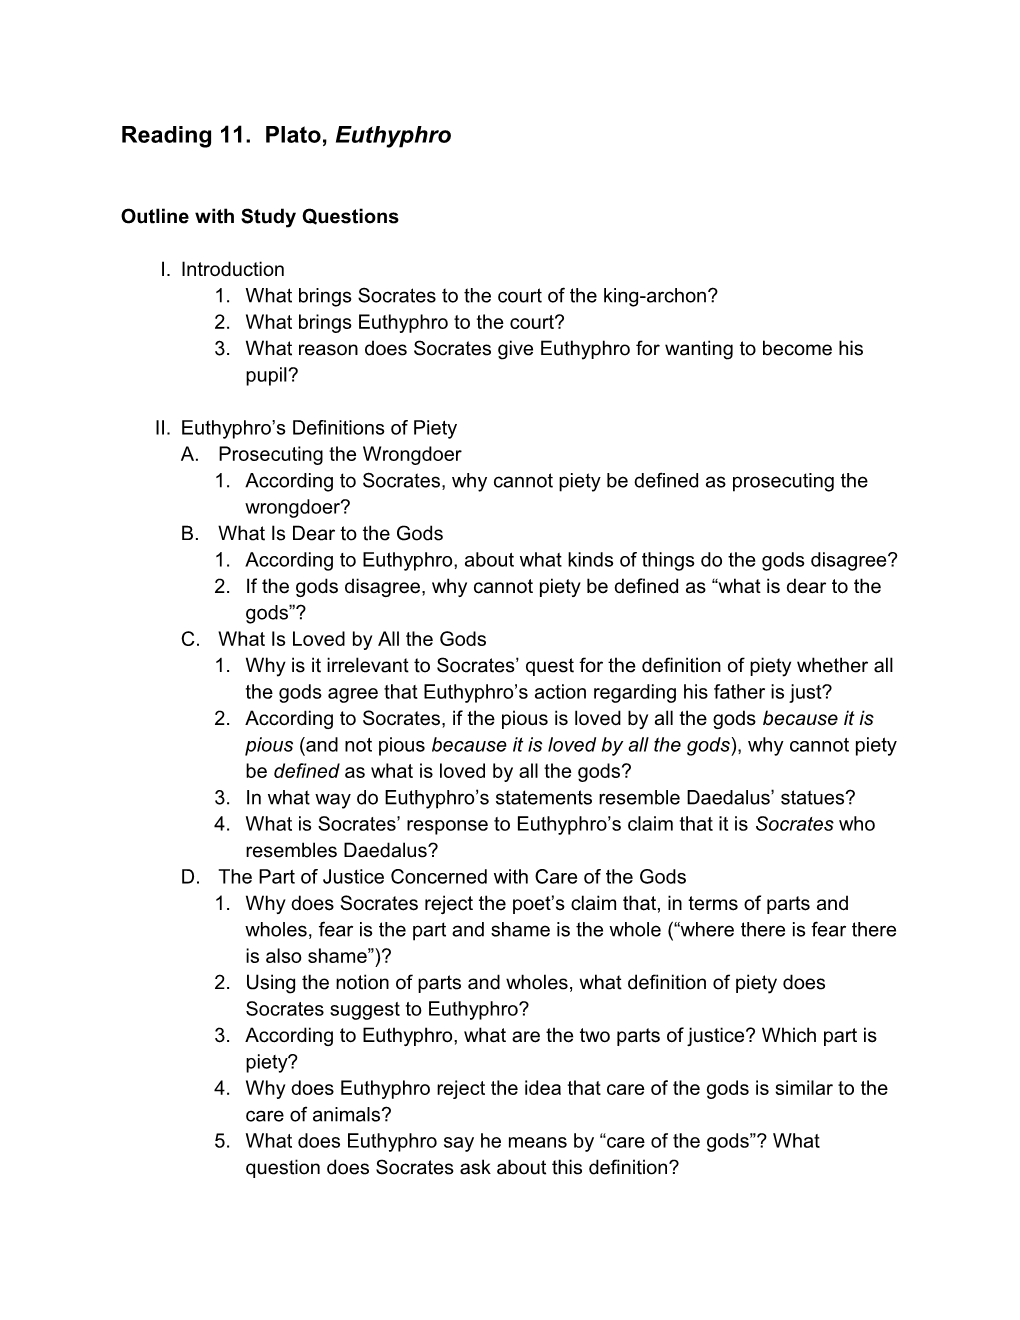 Outline with Study Questions